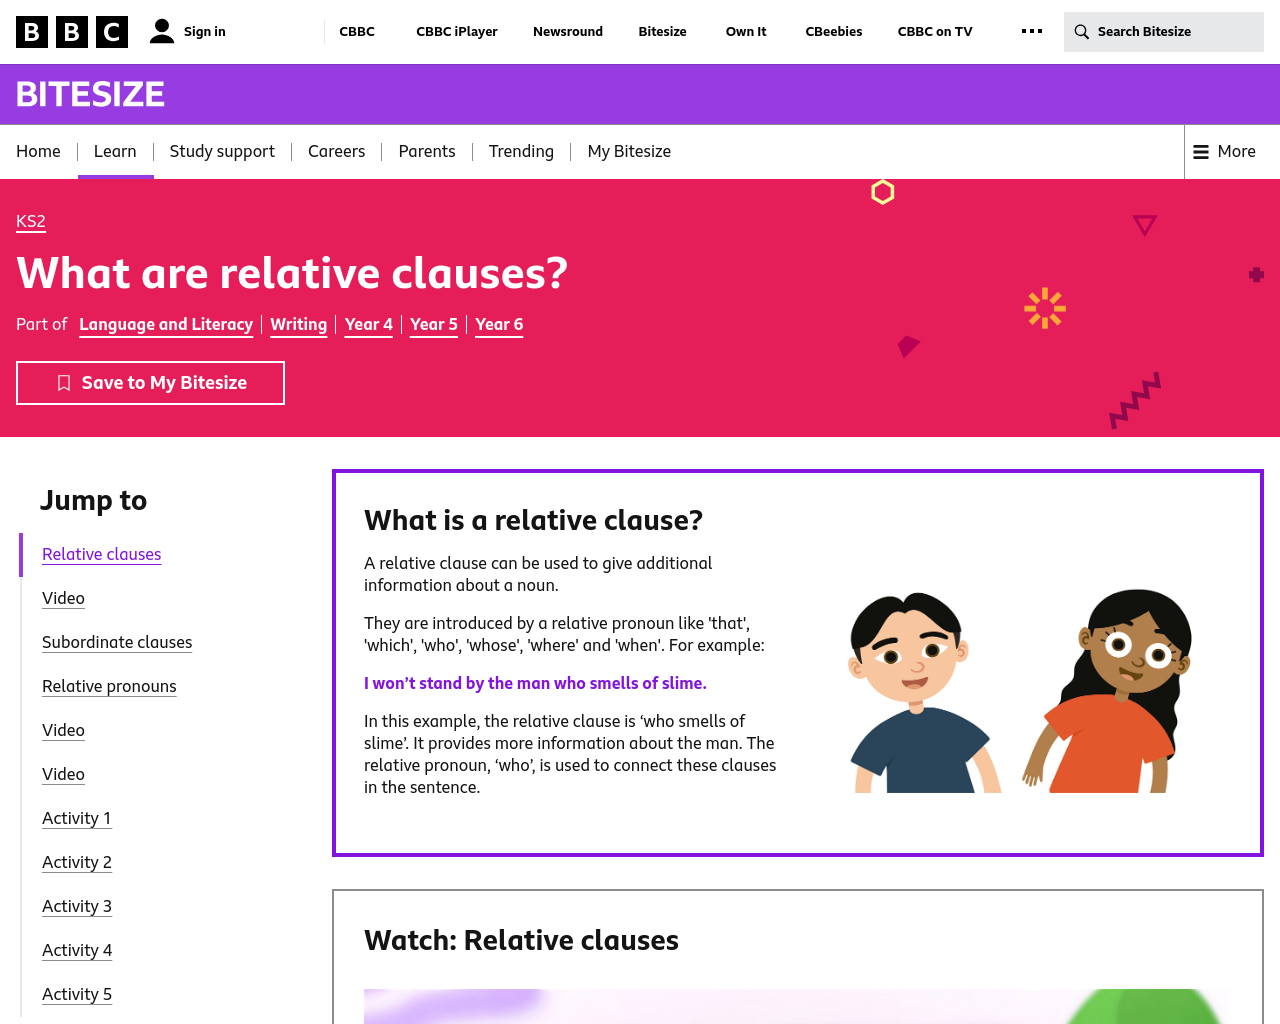 What are relative clauses